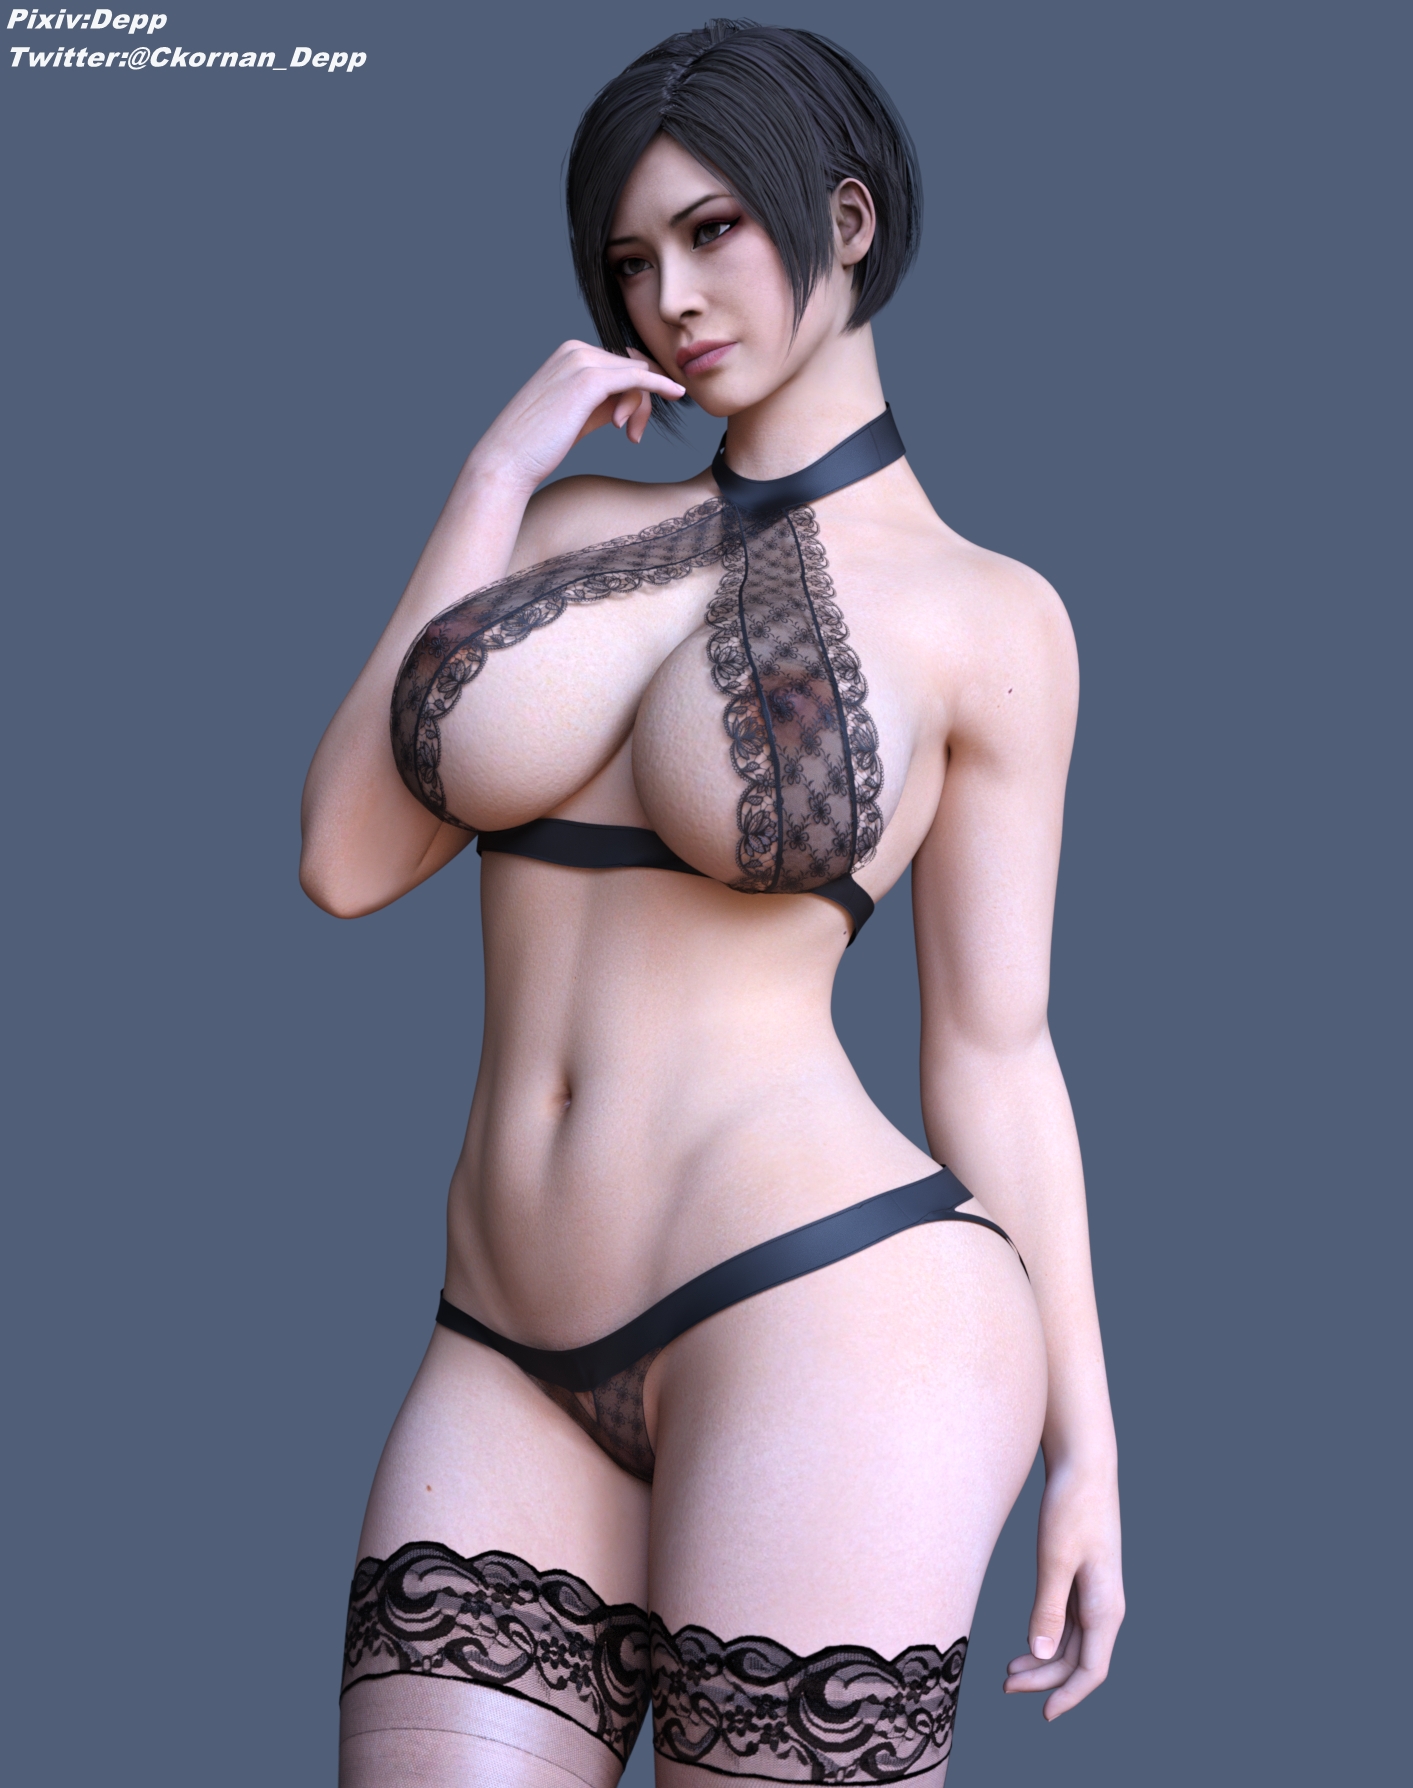 Lace bra strap Ada Wong Resident Evil Lace Bra Lingerie Stockings Panties Thighs 3d Girl